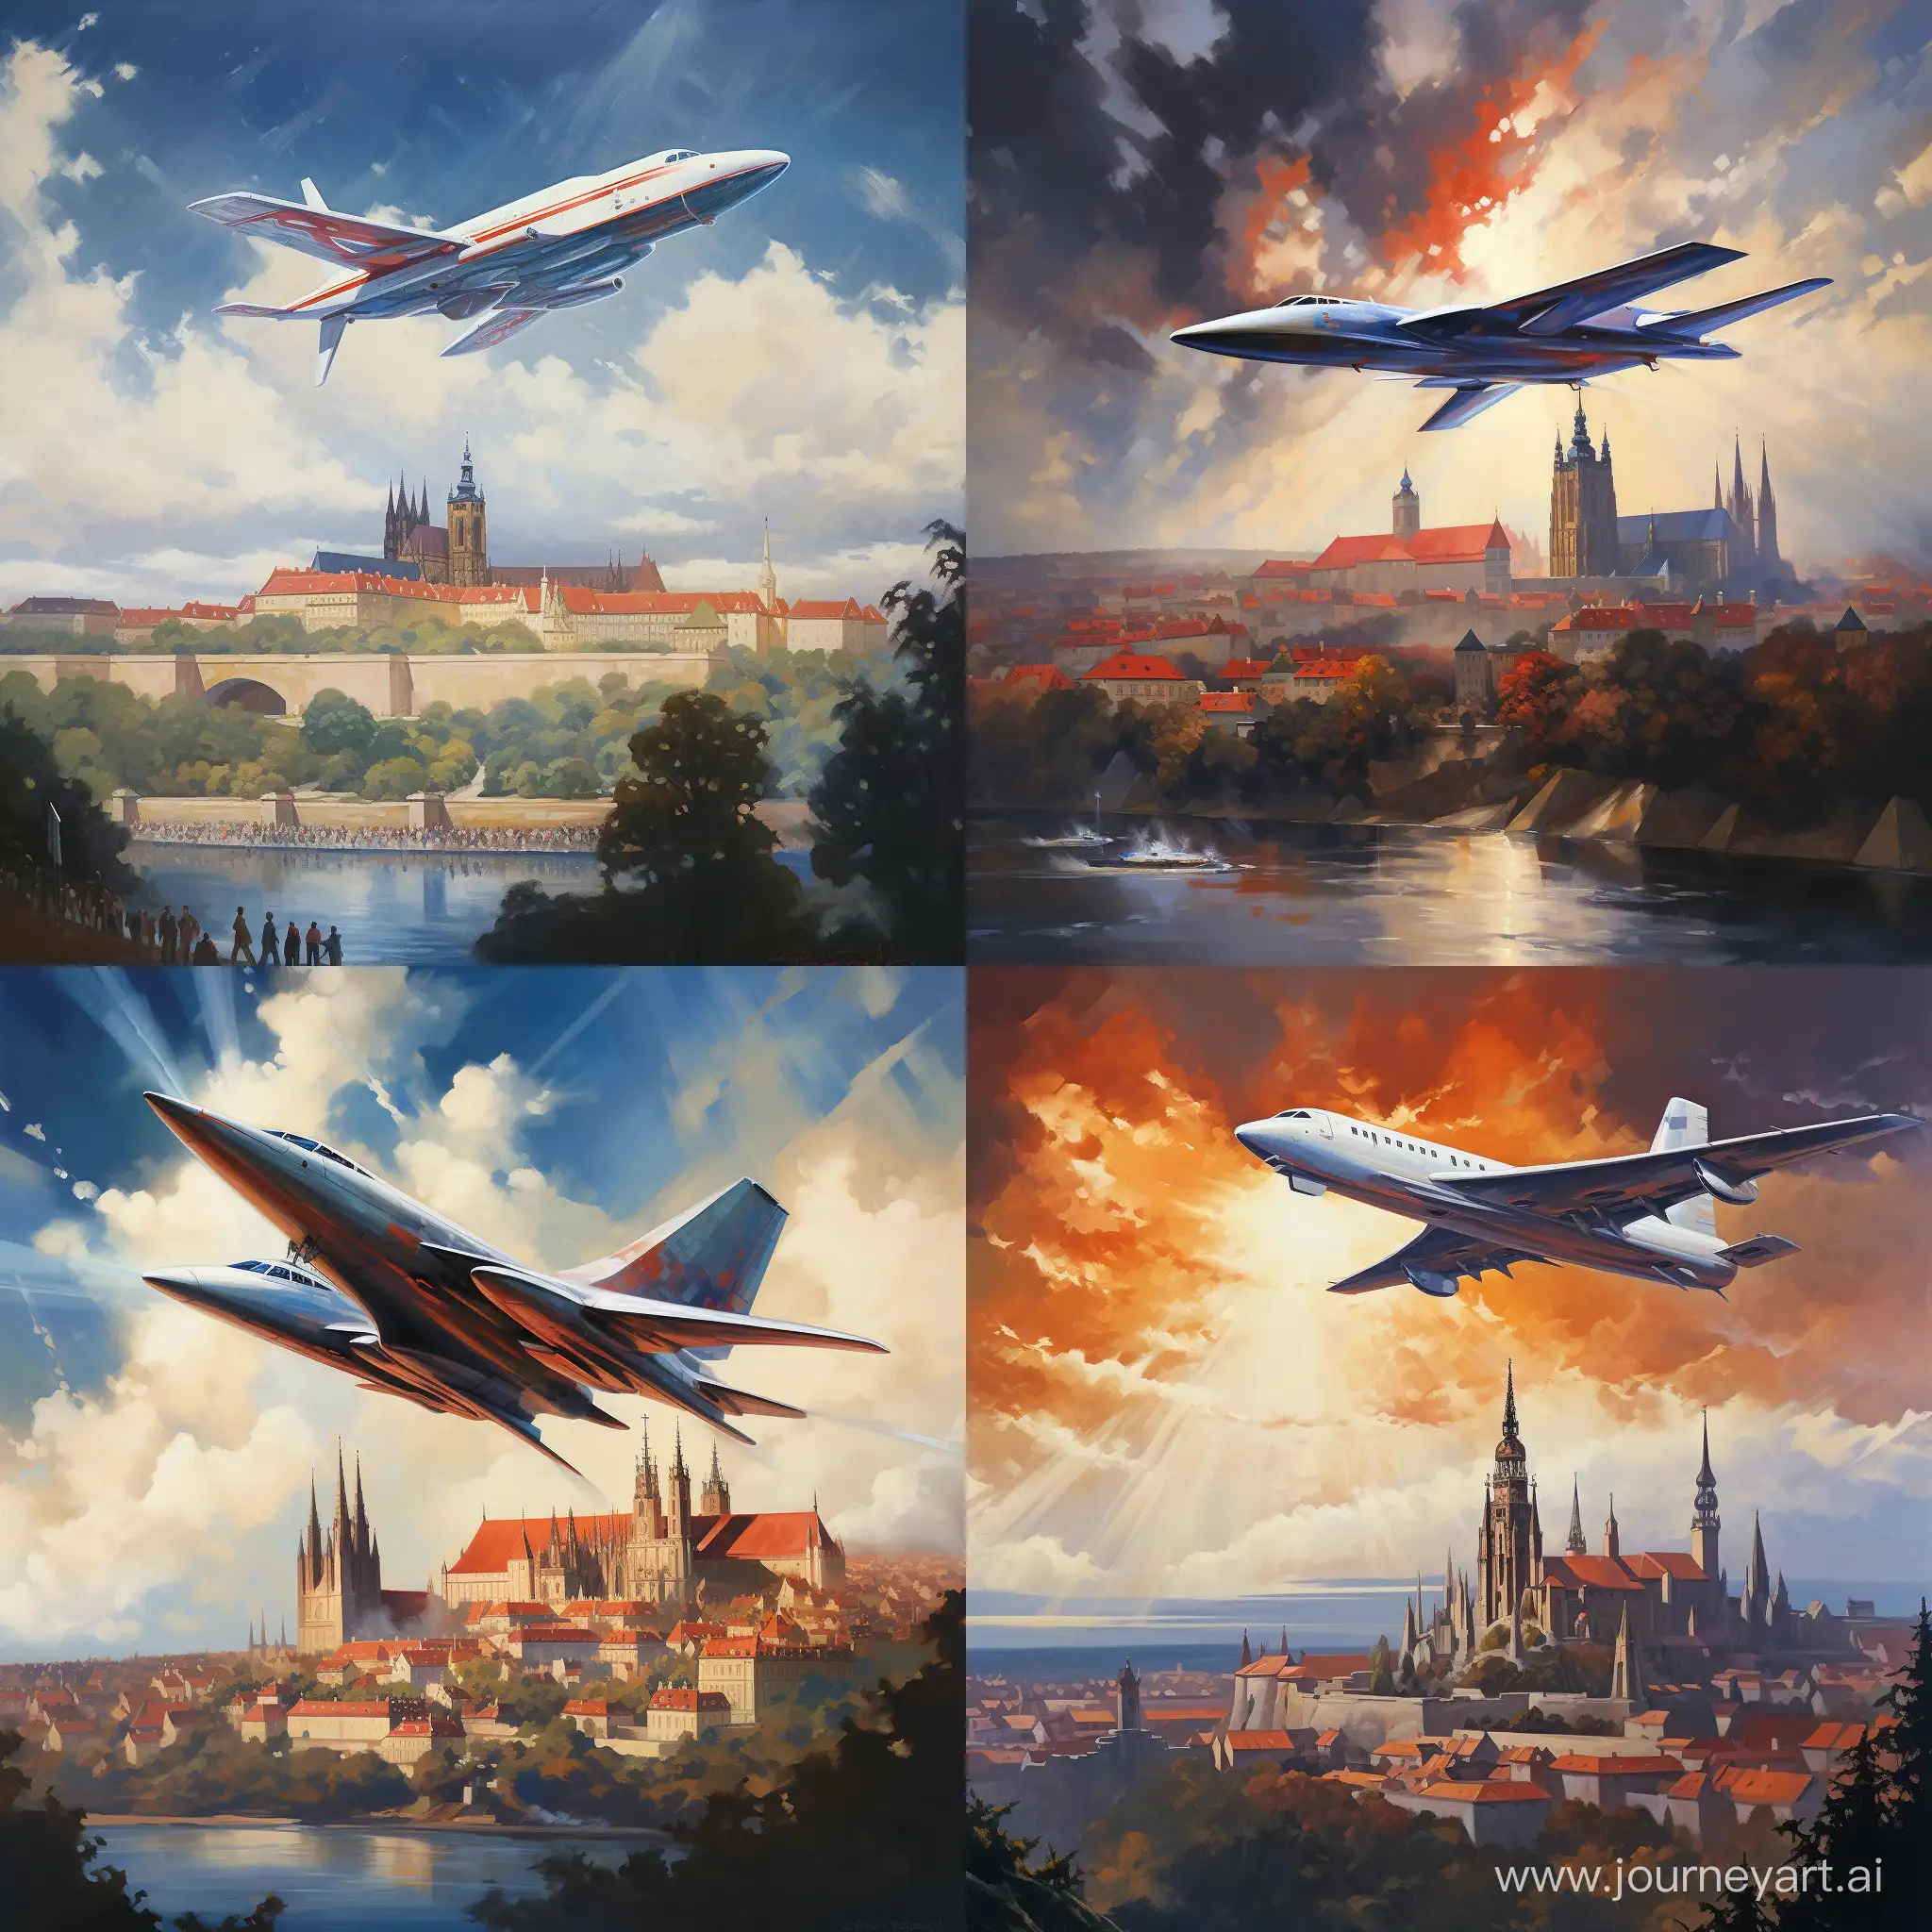 Painting of Concorde flying above Prague Castle, as an oil painting made by a very famous painter